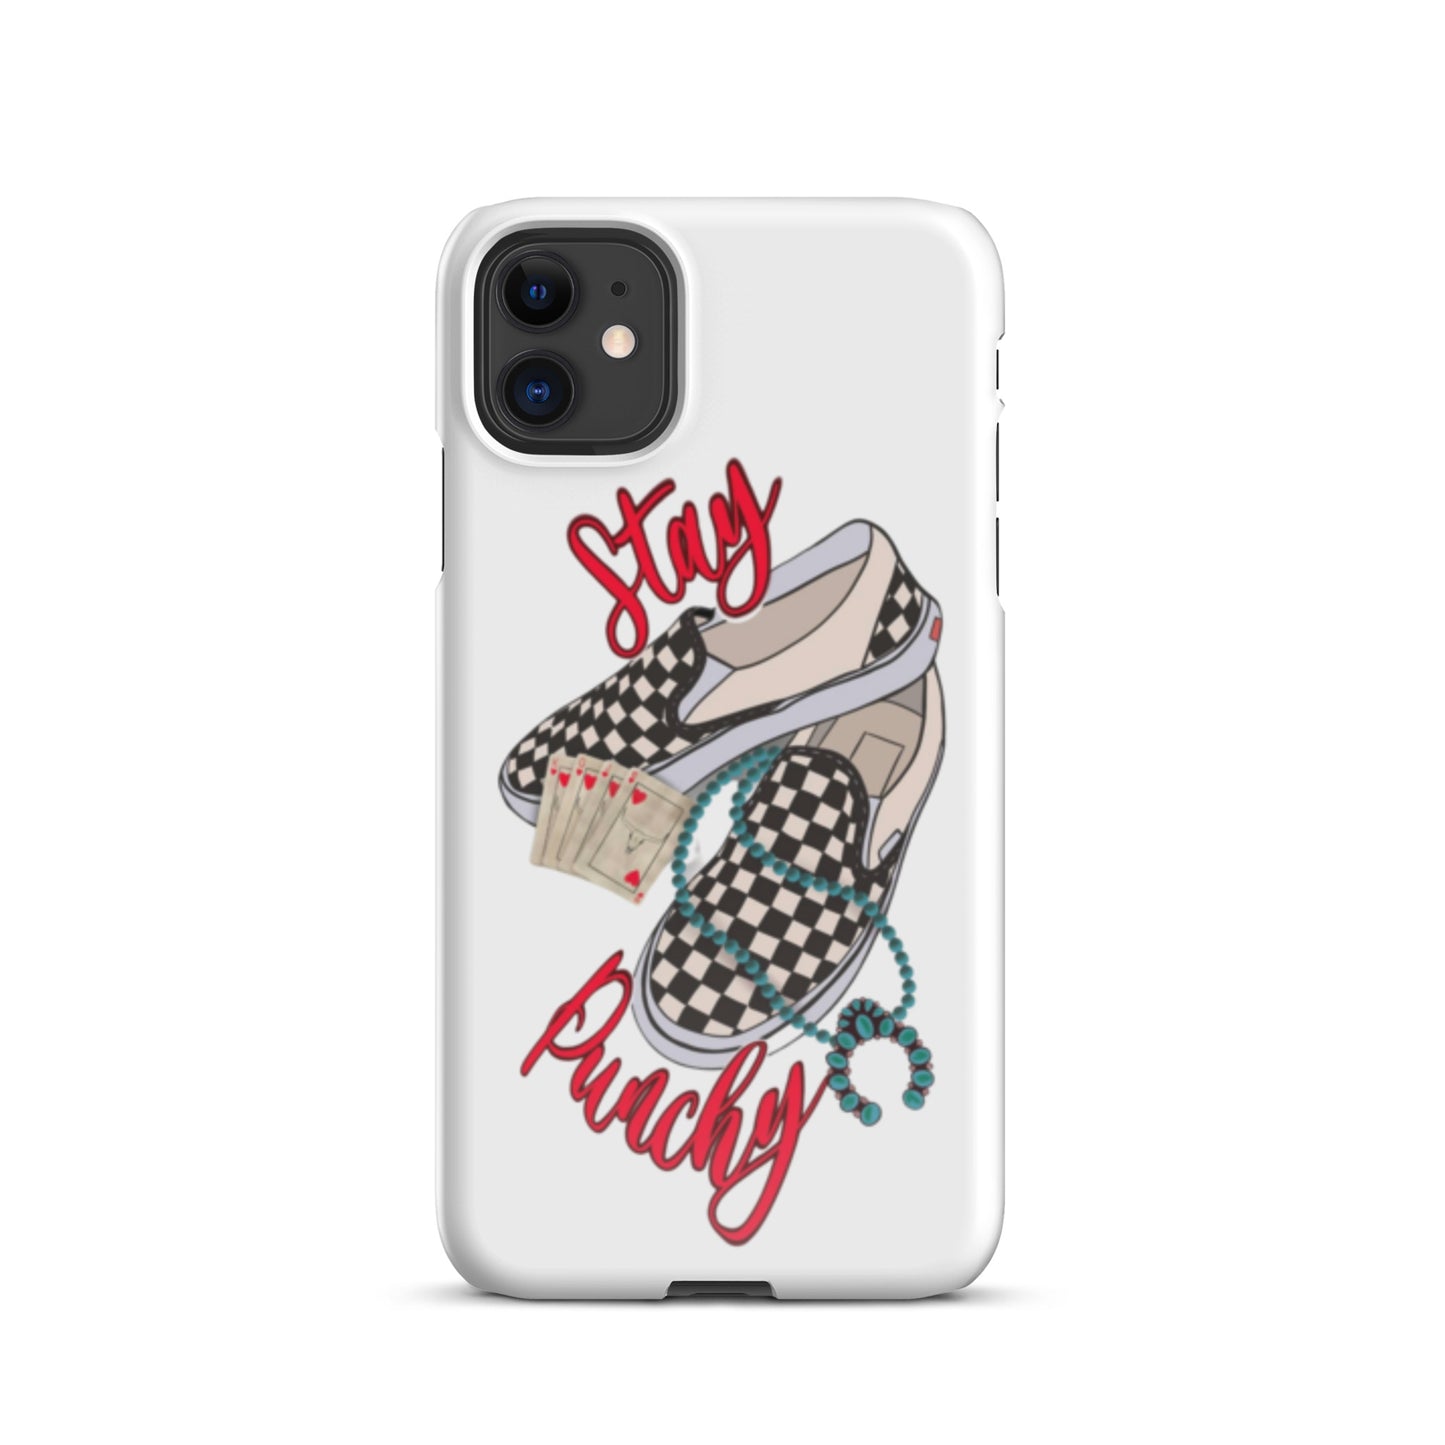 Stay Punchy iphone case